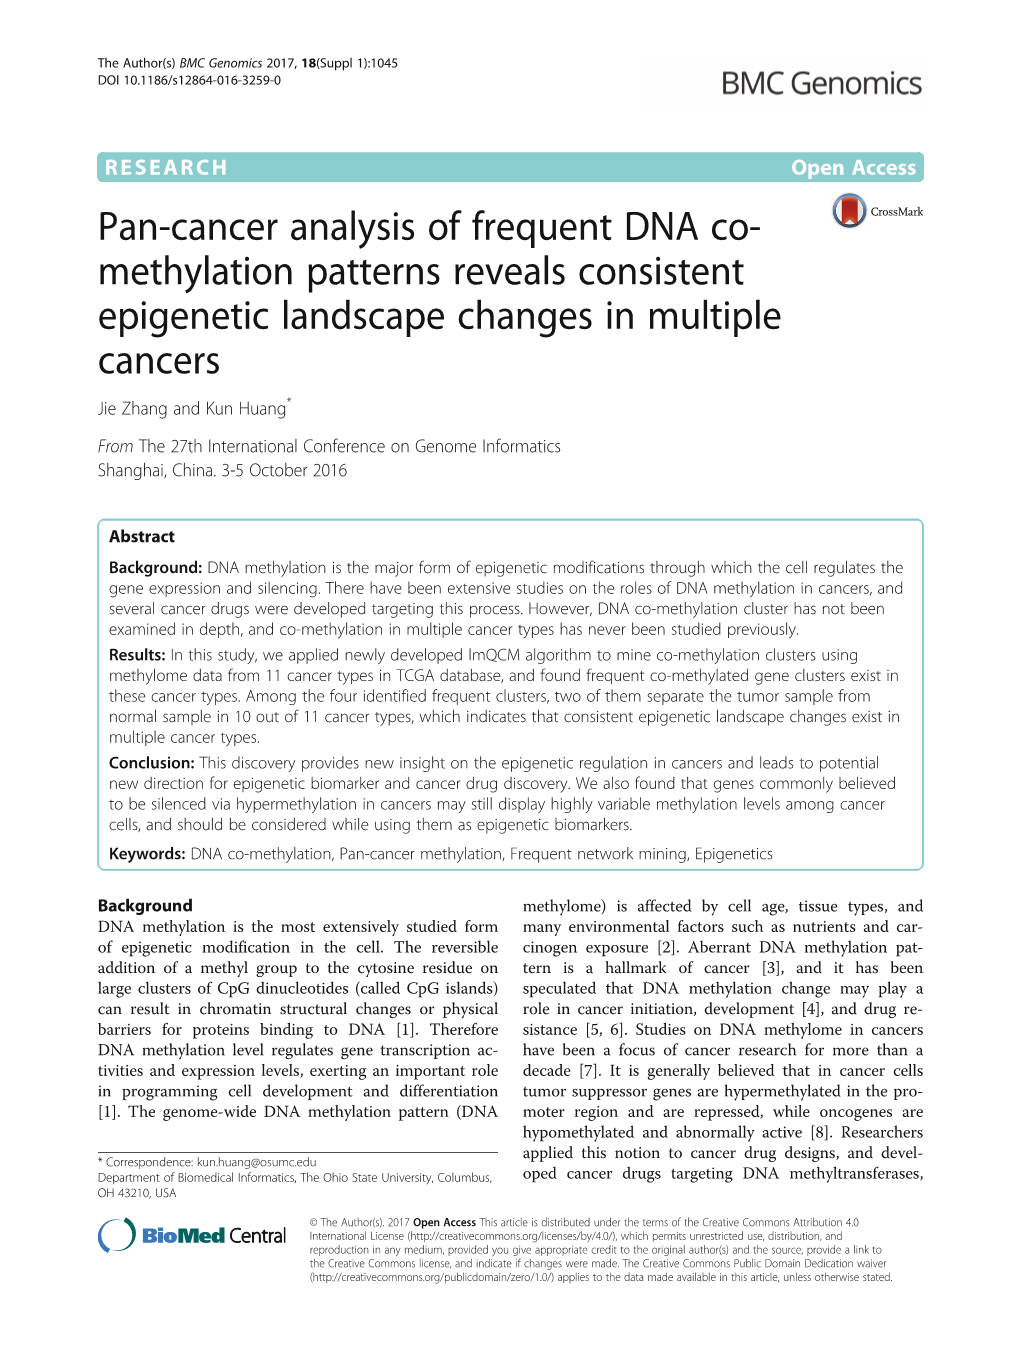 Pan-Cancer Analysis of Frequent DNA Co-Methylation Patterns Reveals